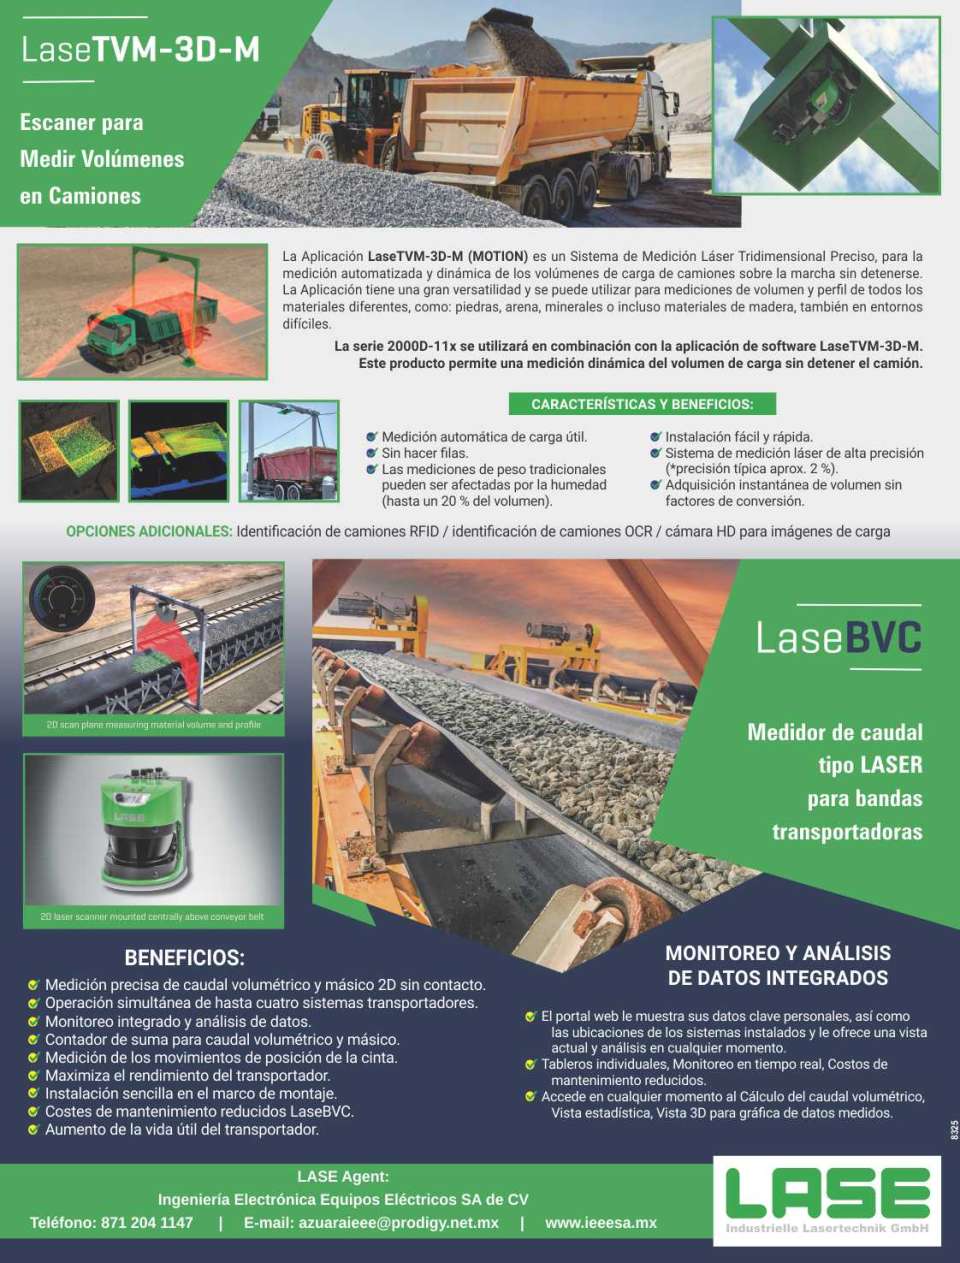 LaseTVM-3D-M: Automatic measurement of truck cargo volumes on the fly. LaseBVC: Precise 2D Volumetric and Mass Flow Measurement without contact.